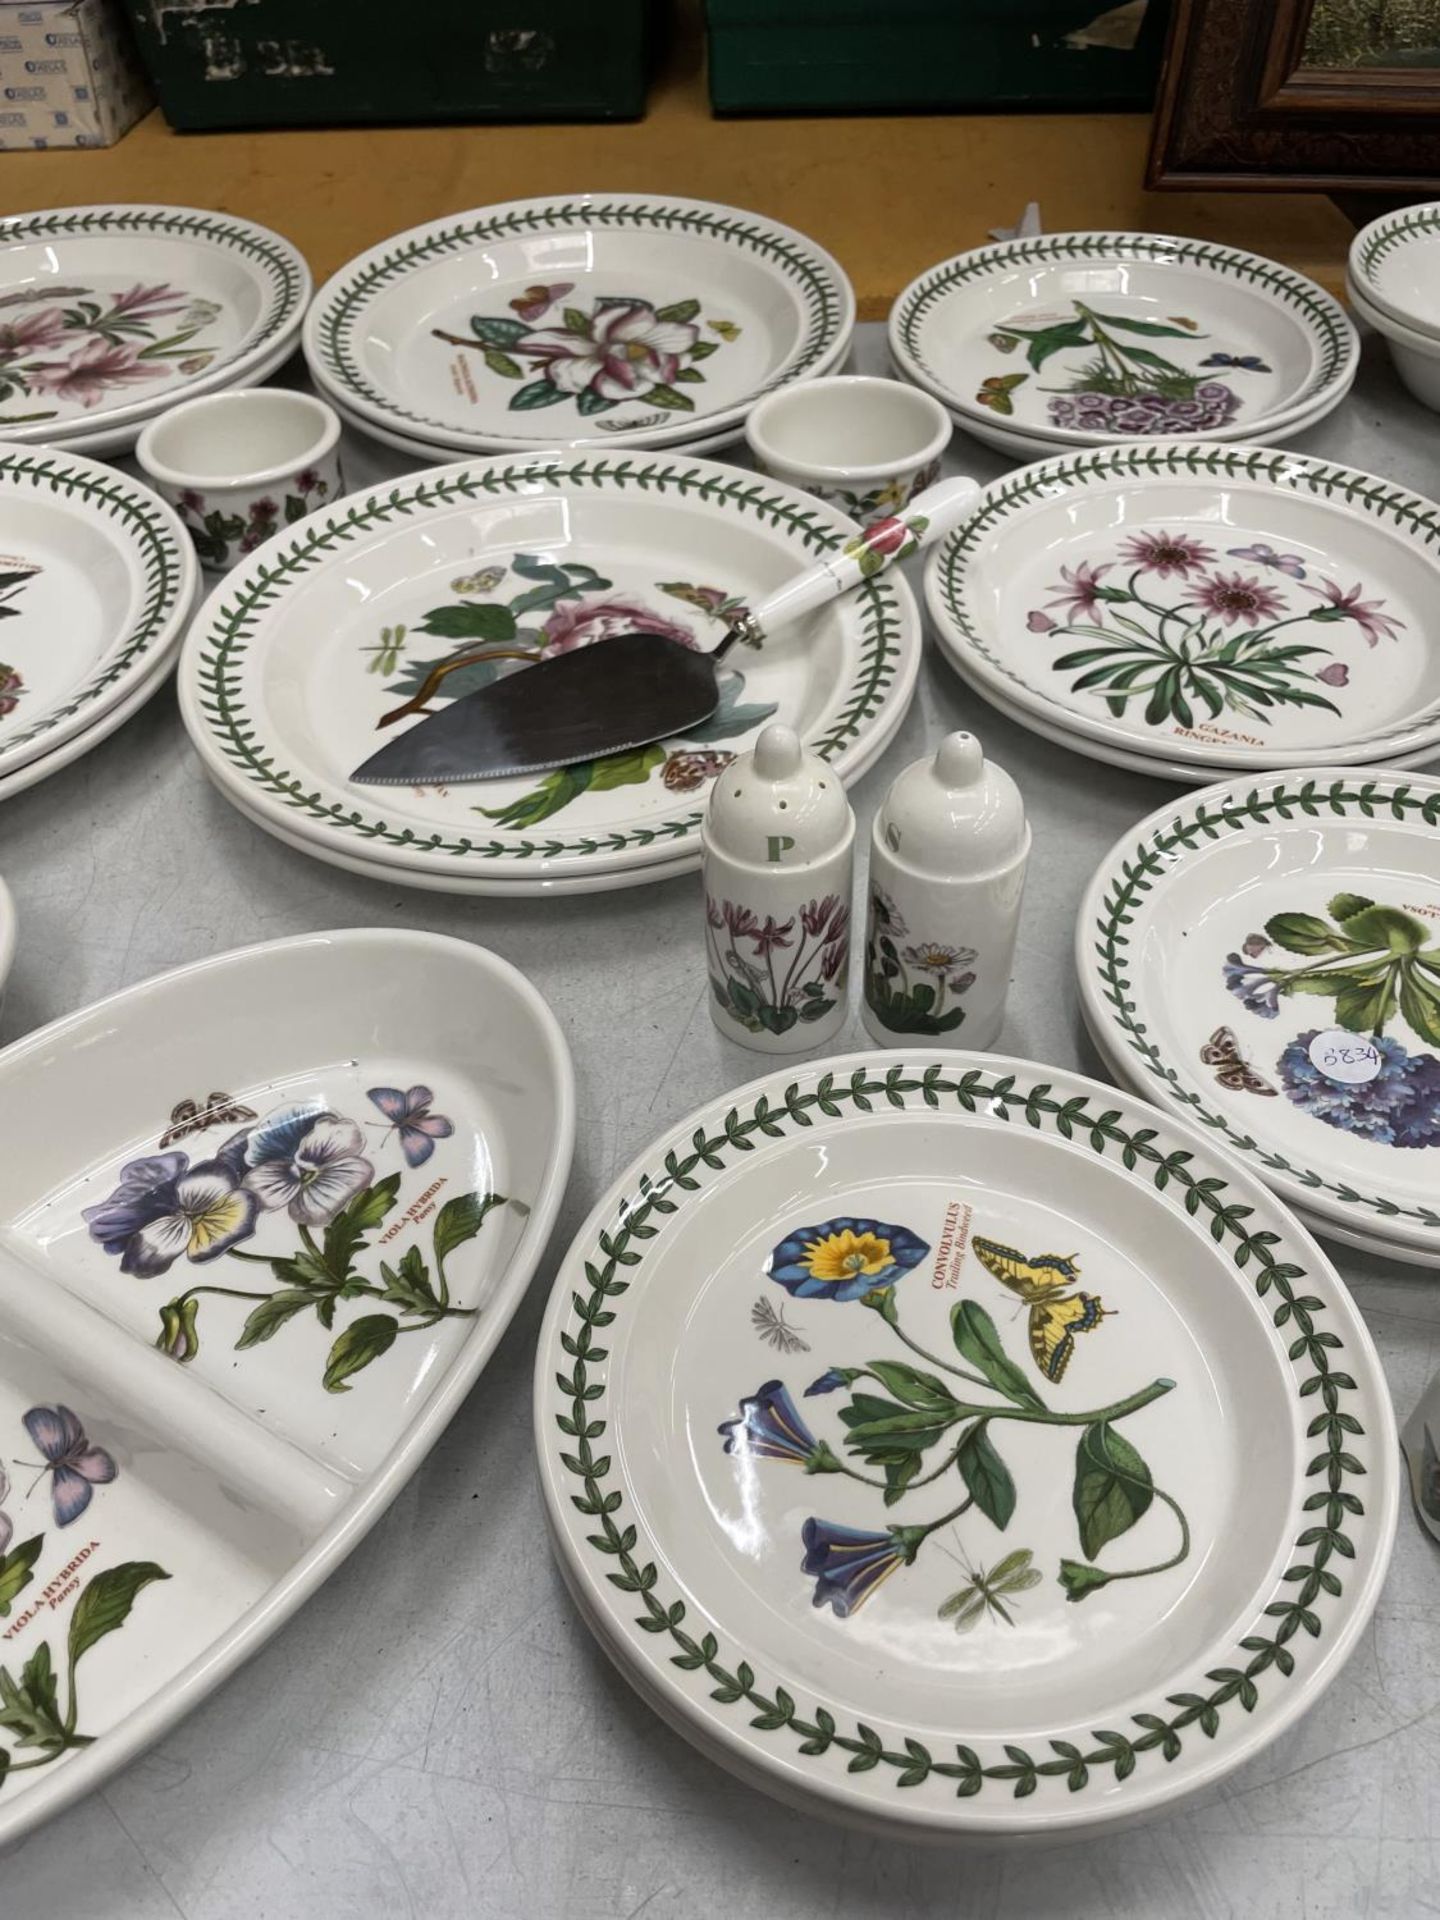 FIFTY FOUR PIECES OF PORTMERION TO INCLUDE BOTANIC GARDEN MUGS, PLATES, CRUETS, JUGS, NAPKIN RINGS - Image 5 of 7